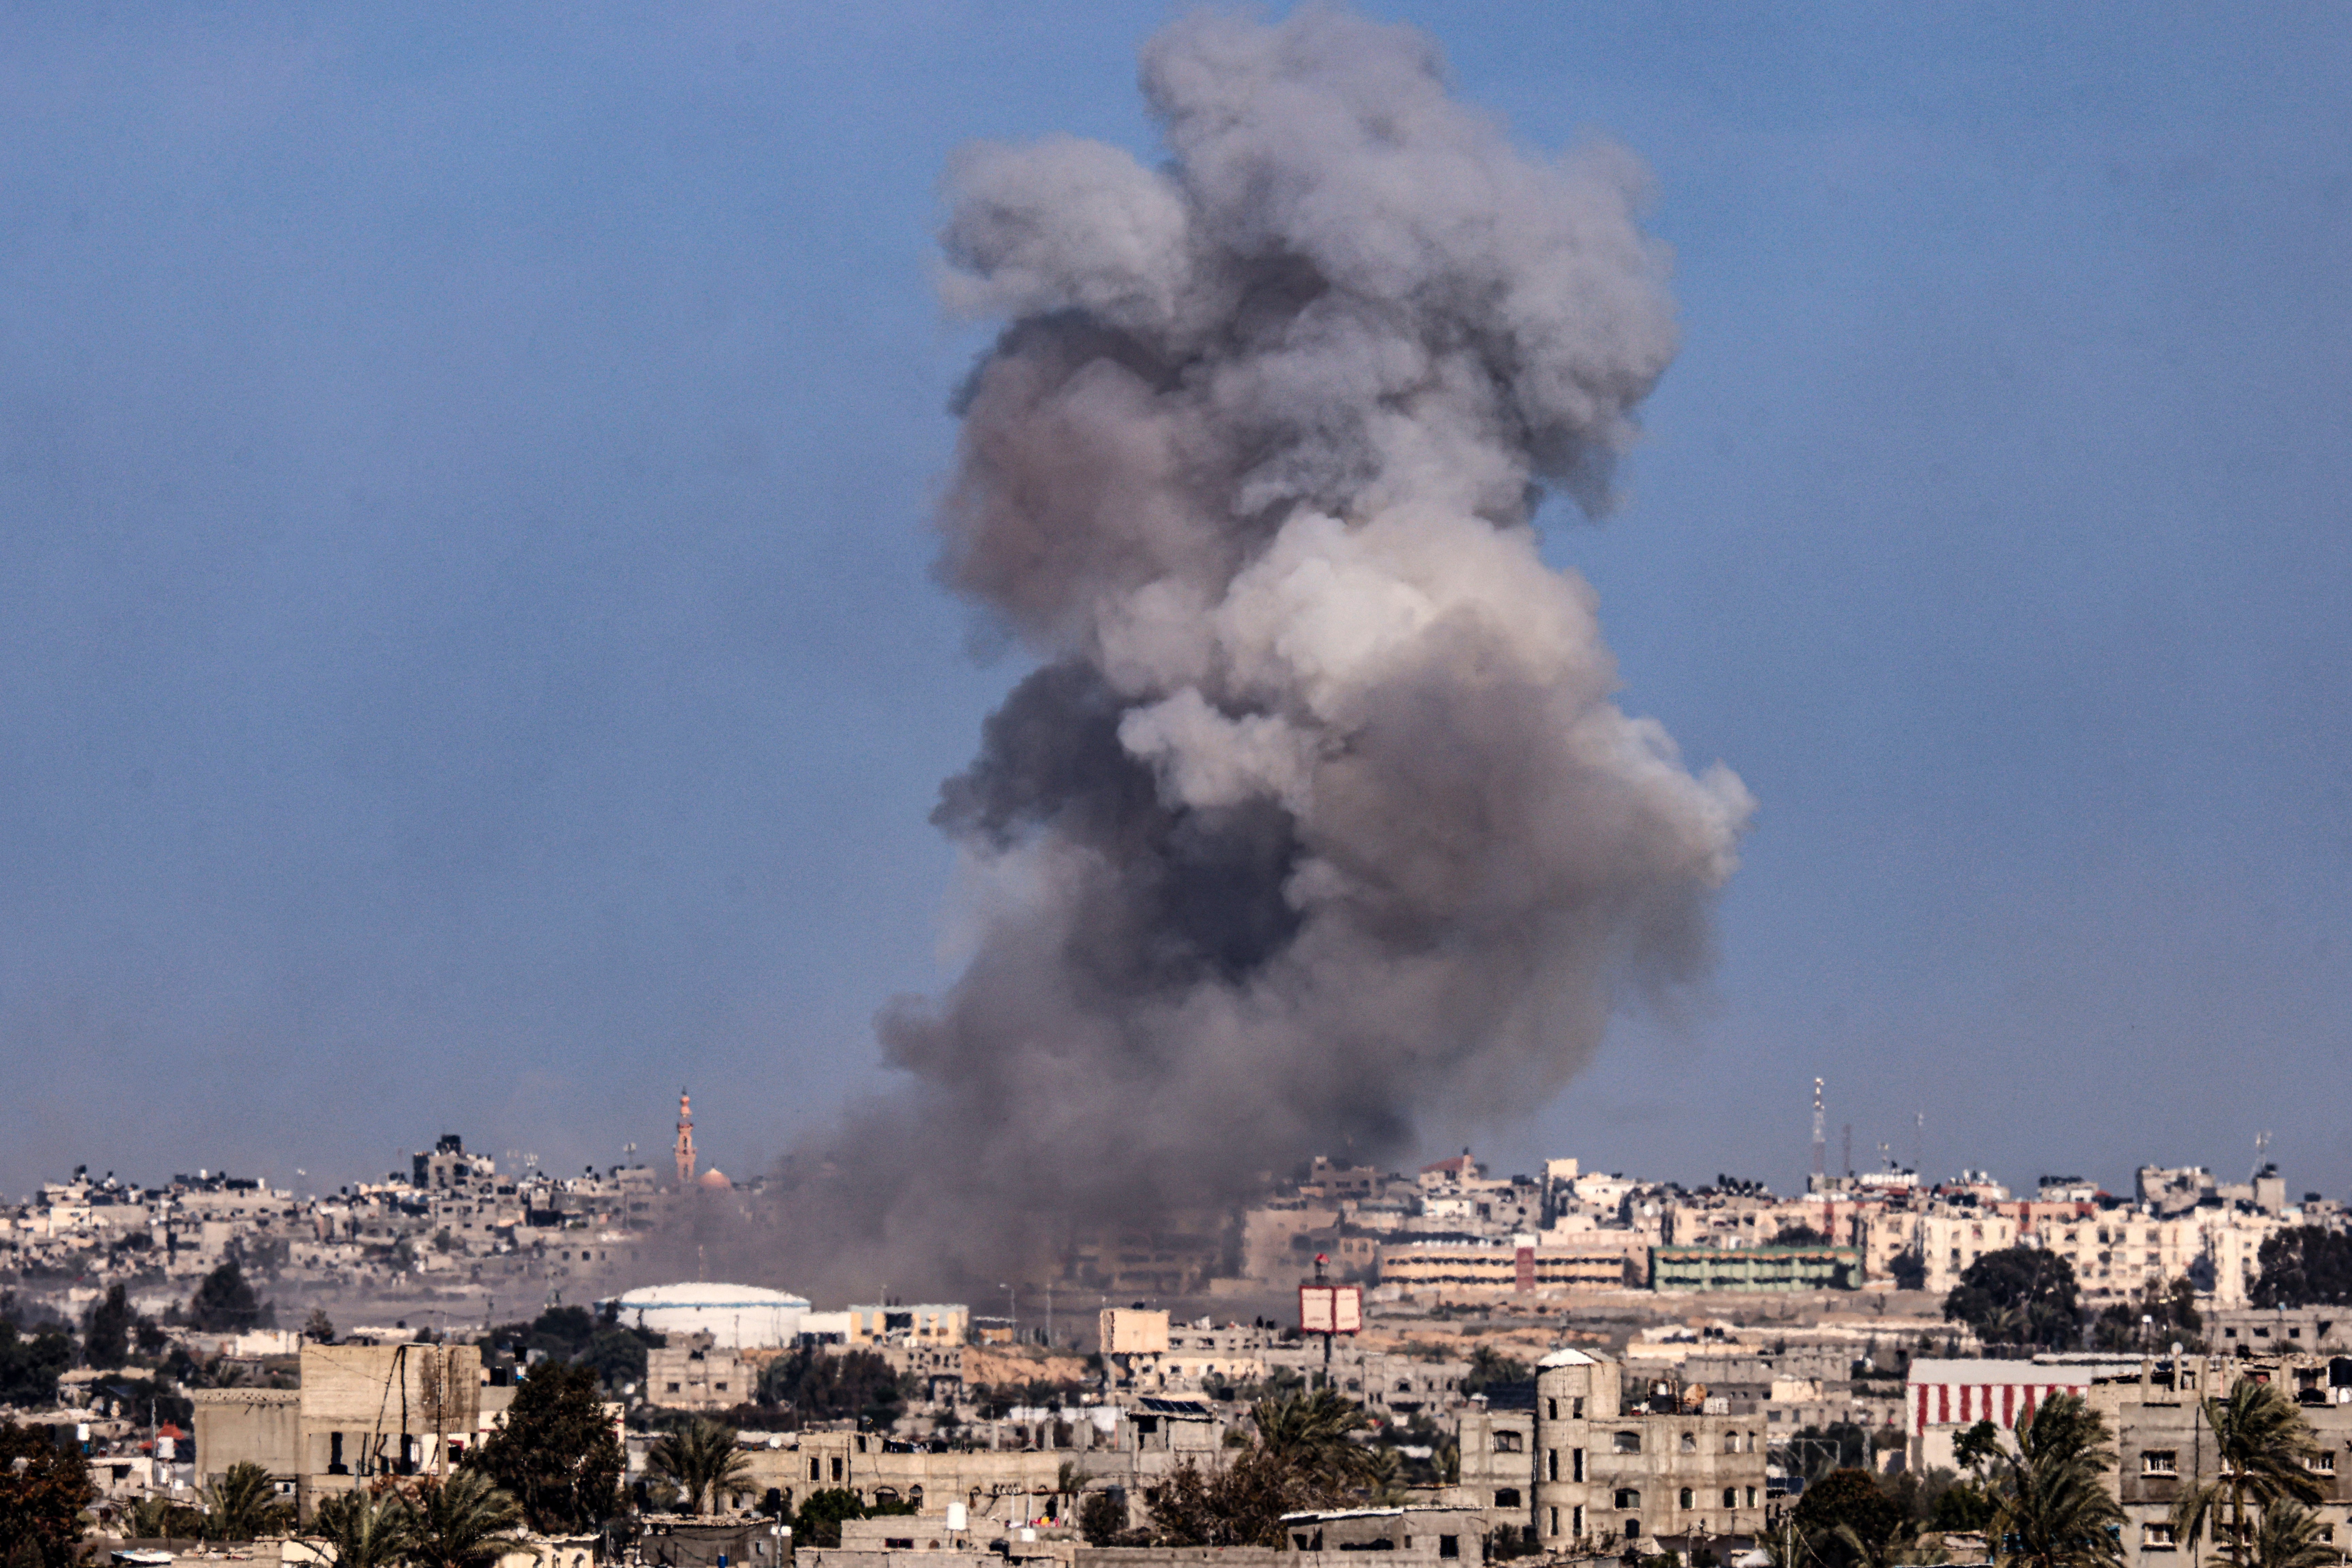 Smoke billows over buildings in southern Gaza following Israeli airstrikes